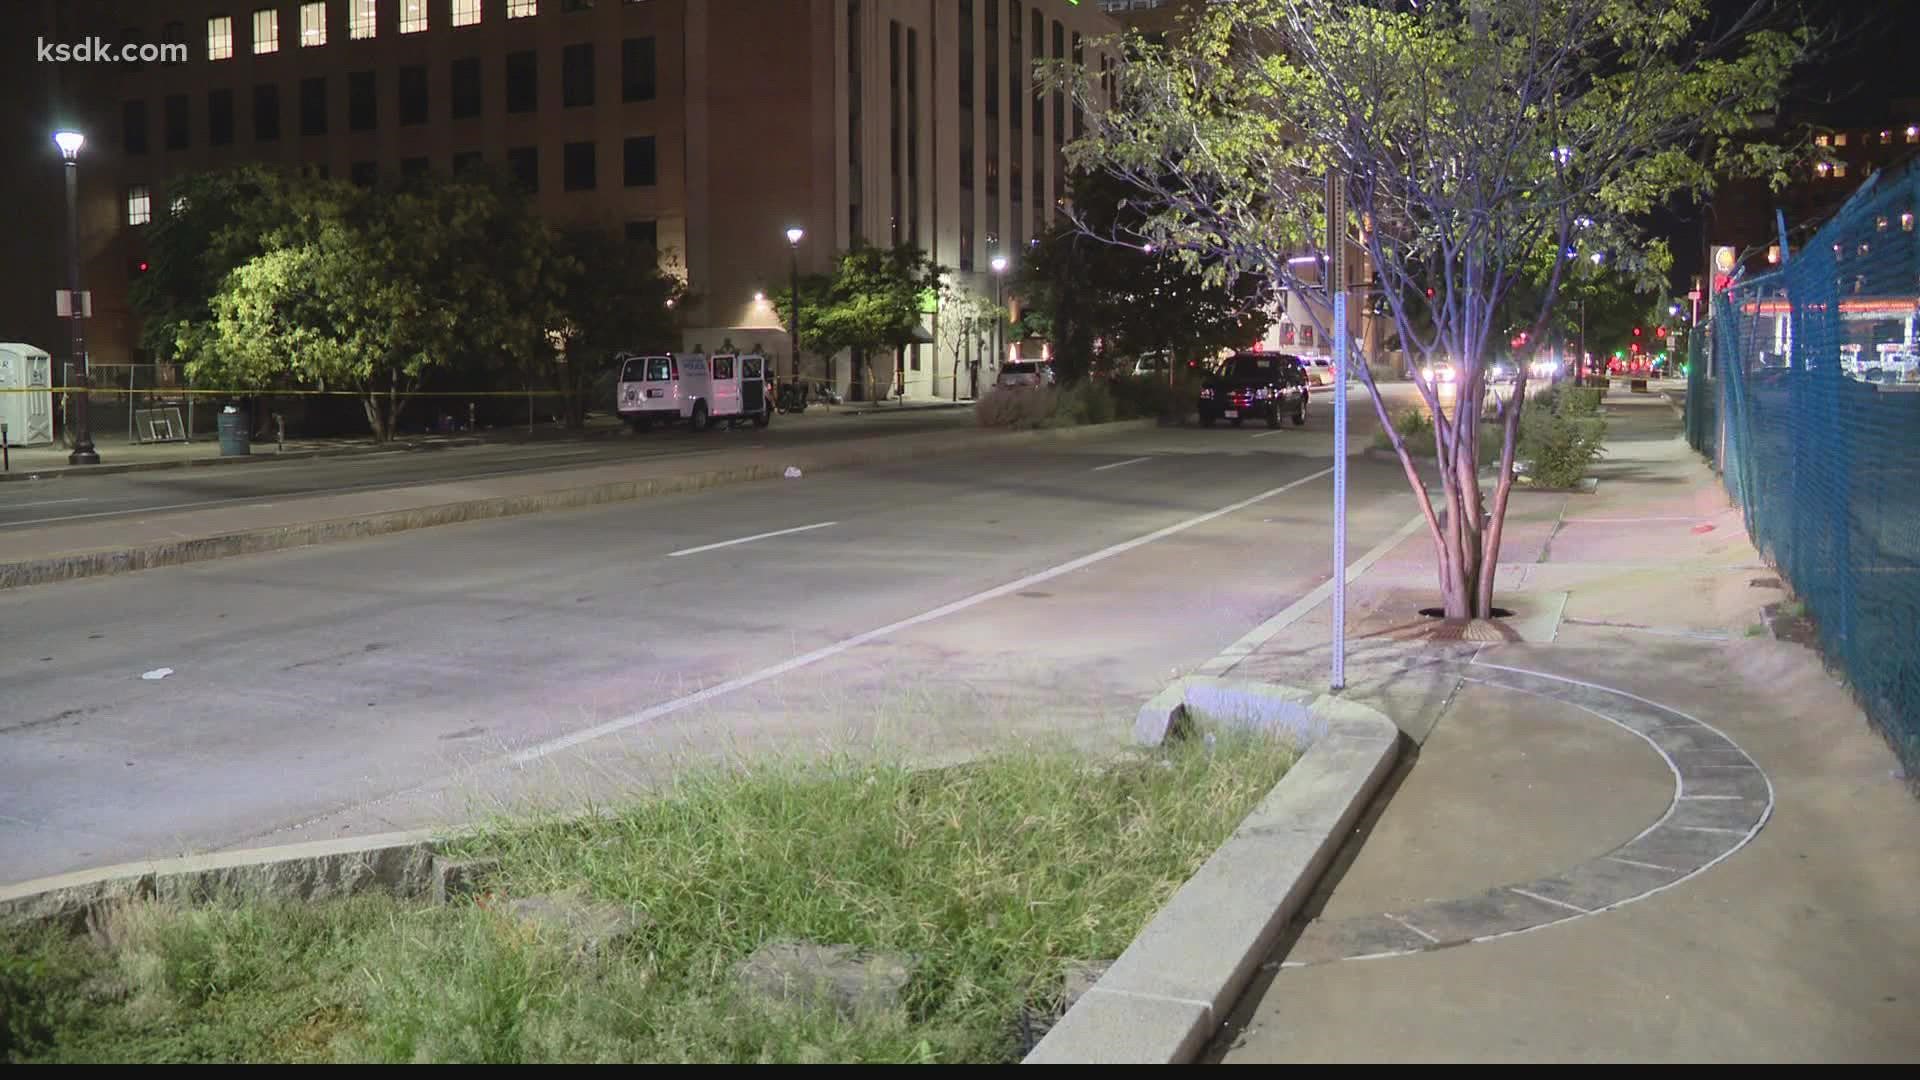 Police found a man in his mid-30s suffering from a gunshot wound near the intersection of Tucker Boulevard and Convention Plaza